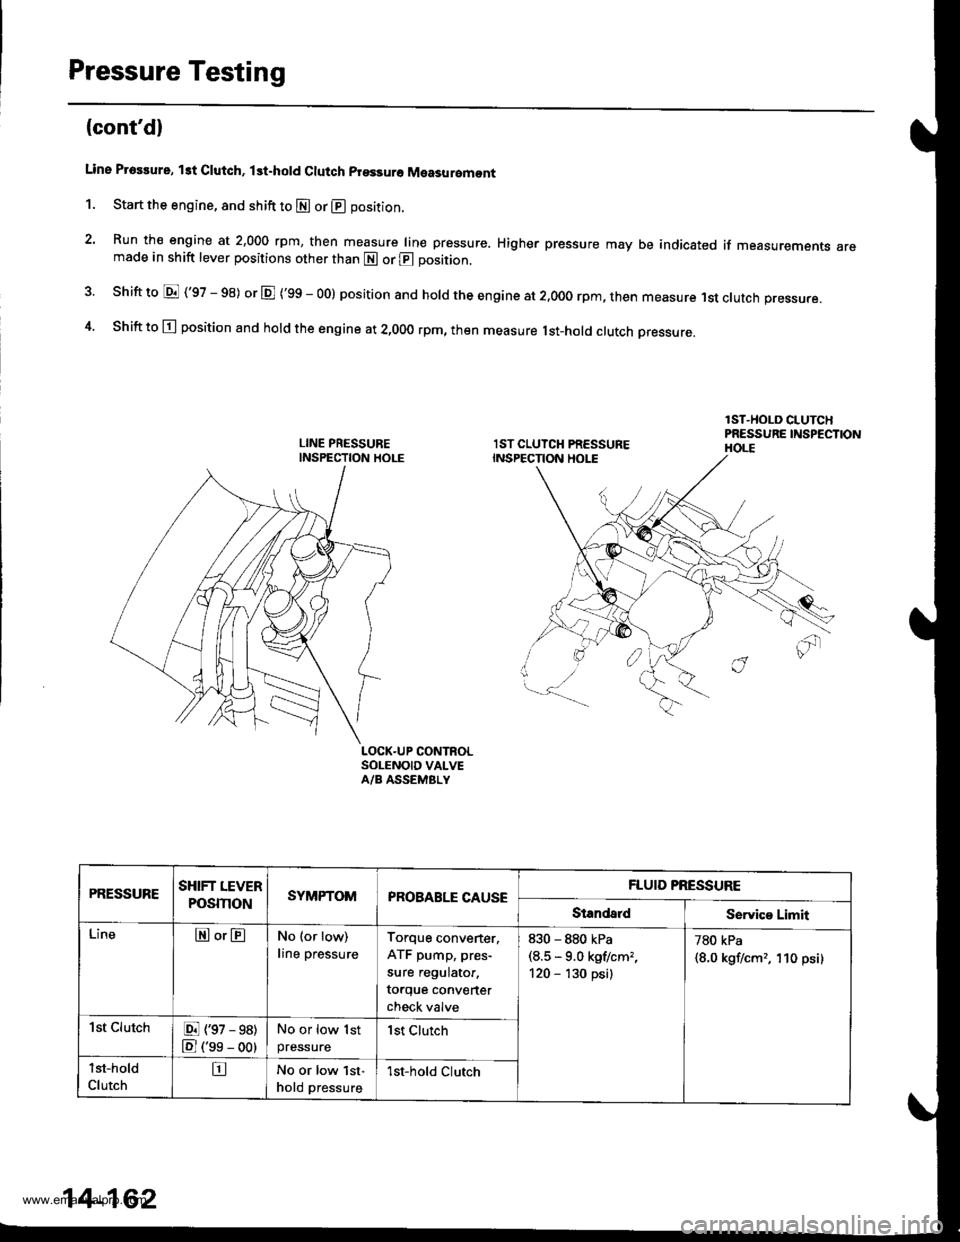 HONDA CR-V 1997 RD1-RD3 / 1.G Service Manual 
Pressure Testing
(contd)
Line Proslure, lst Clutch, lst.hold Clutch prsssuro Measuromont
1. Start the engine, and shift to E or @ position.
2. Run the engine at 2,000 rpm, then measure line pressure